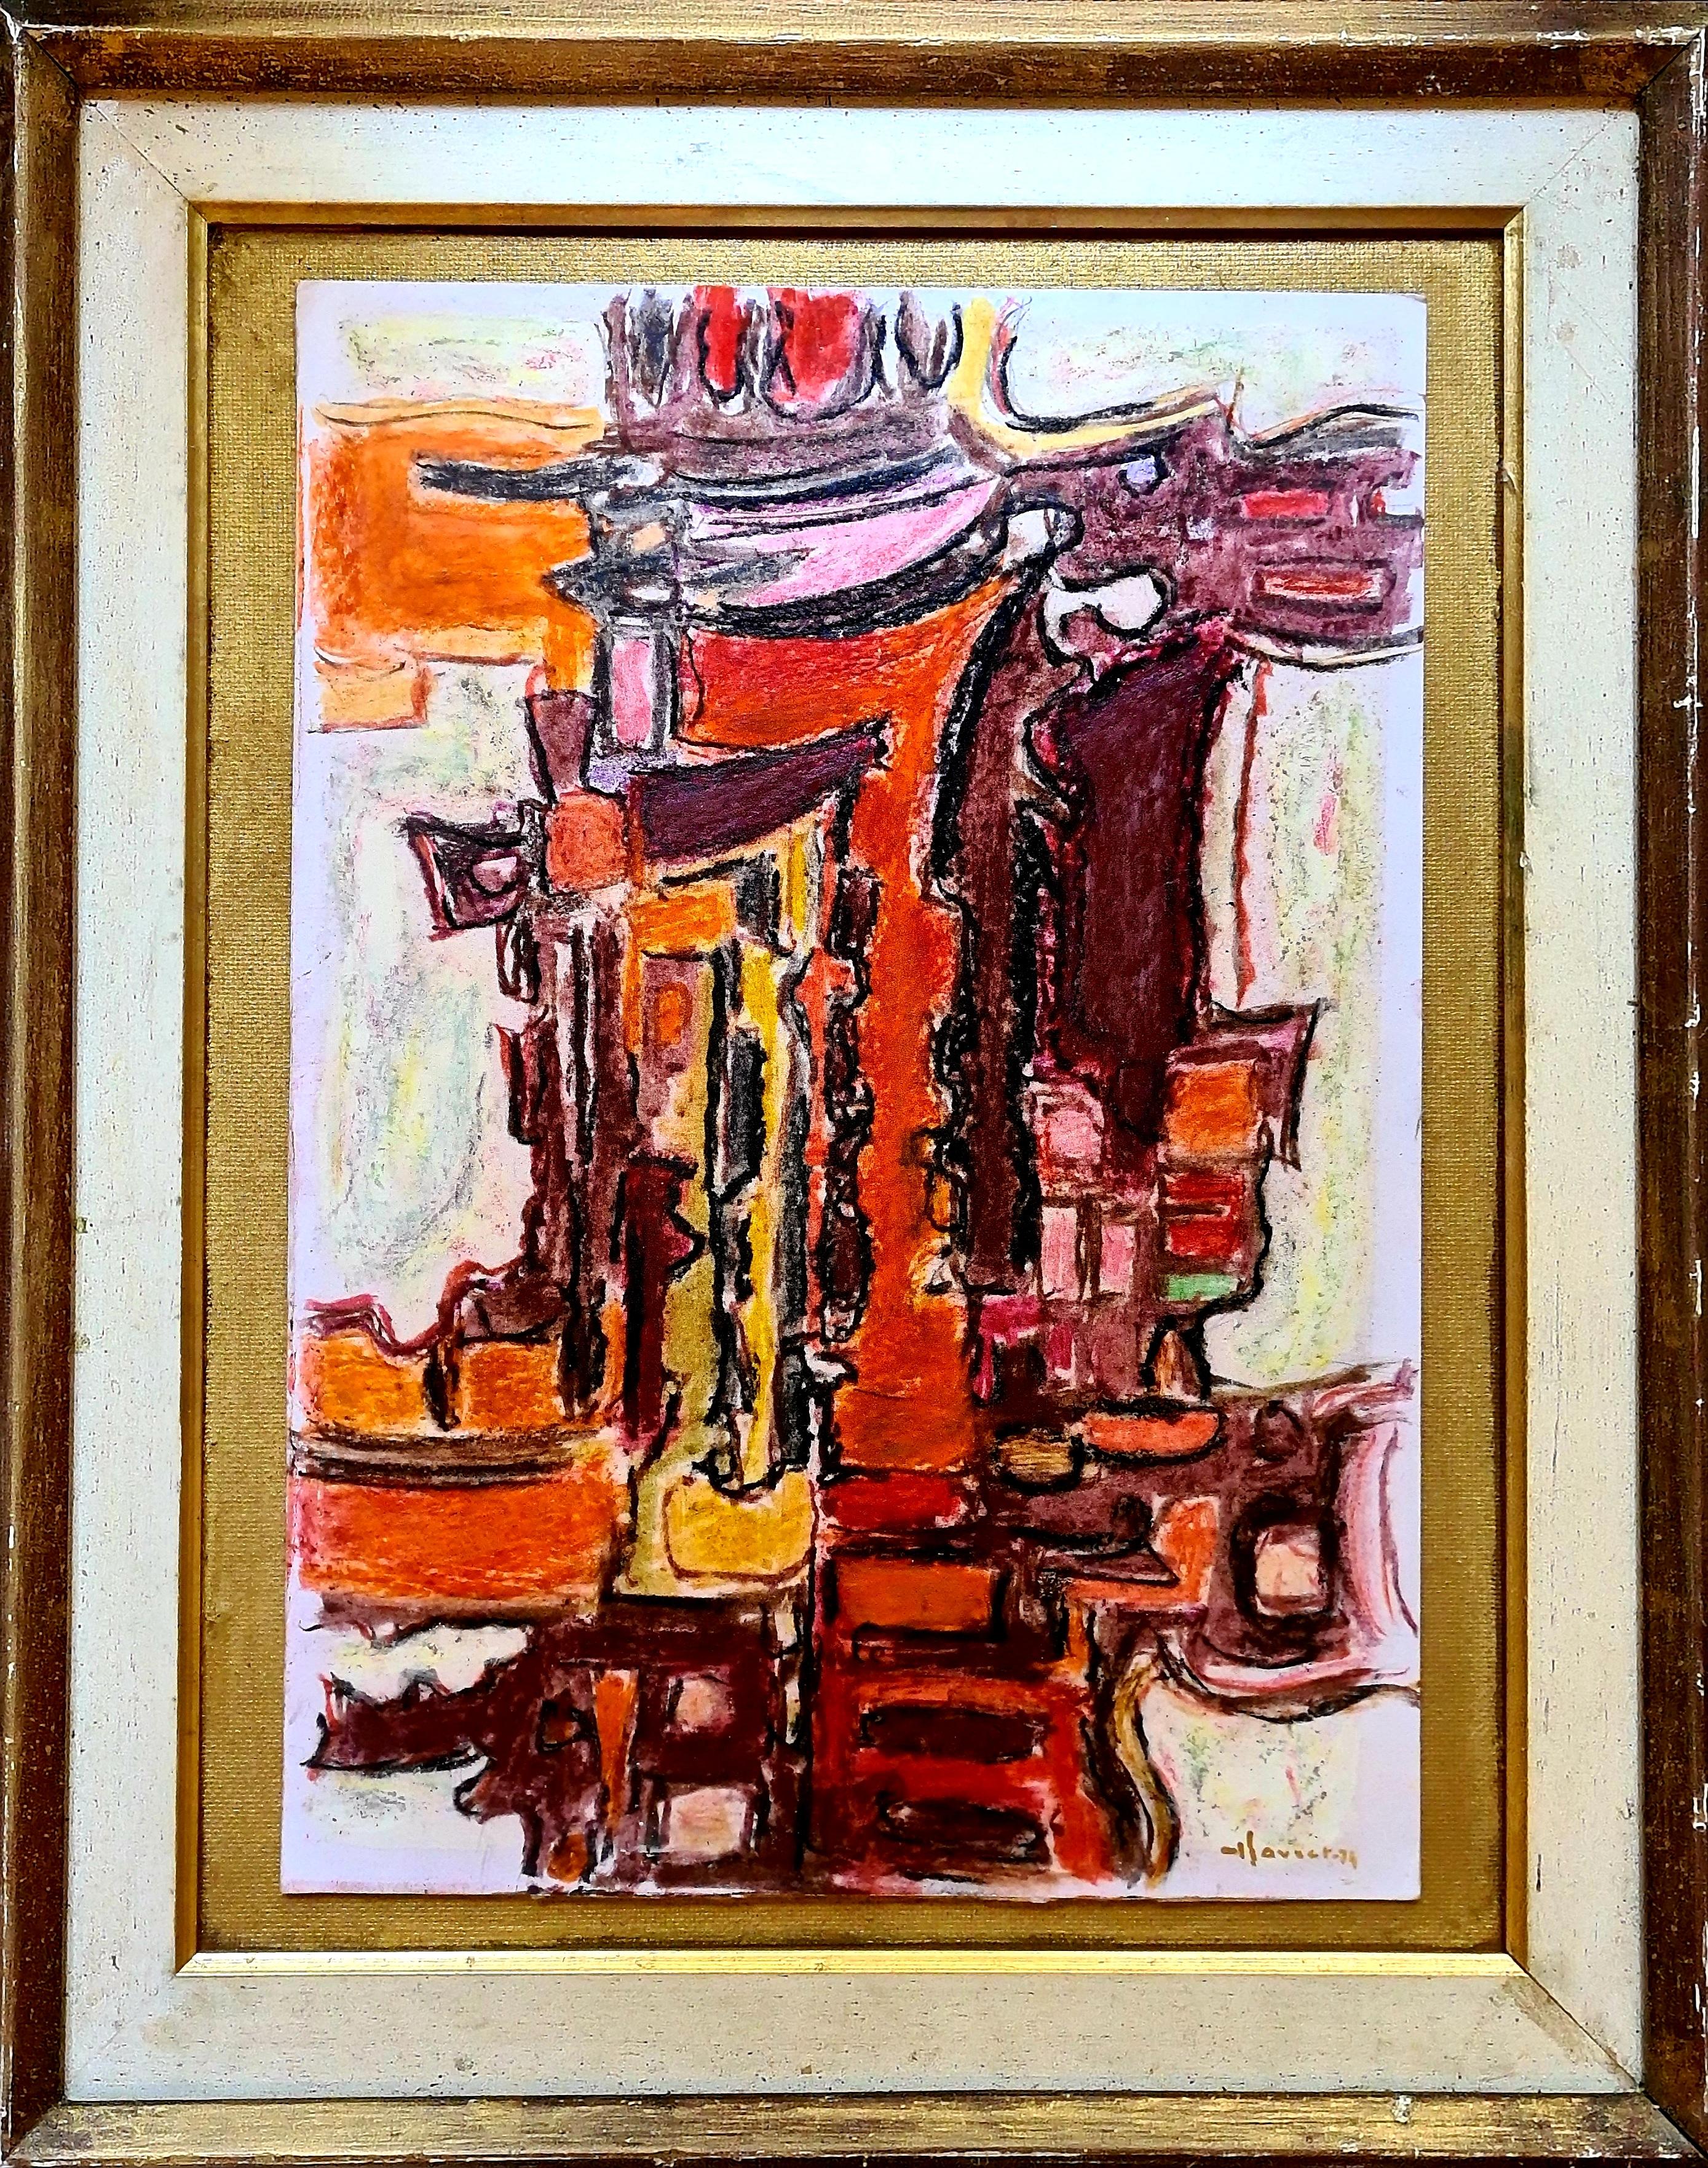 Mid Century Abstract Expressionist Composition, Symphony in Orange.